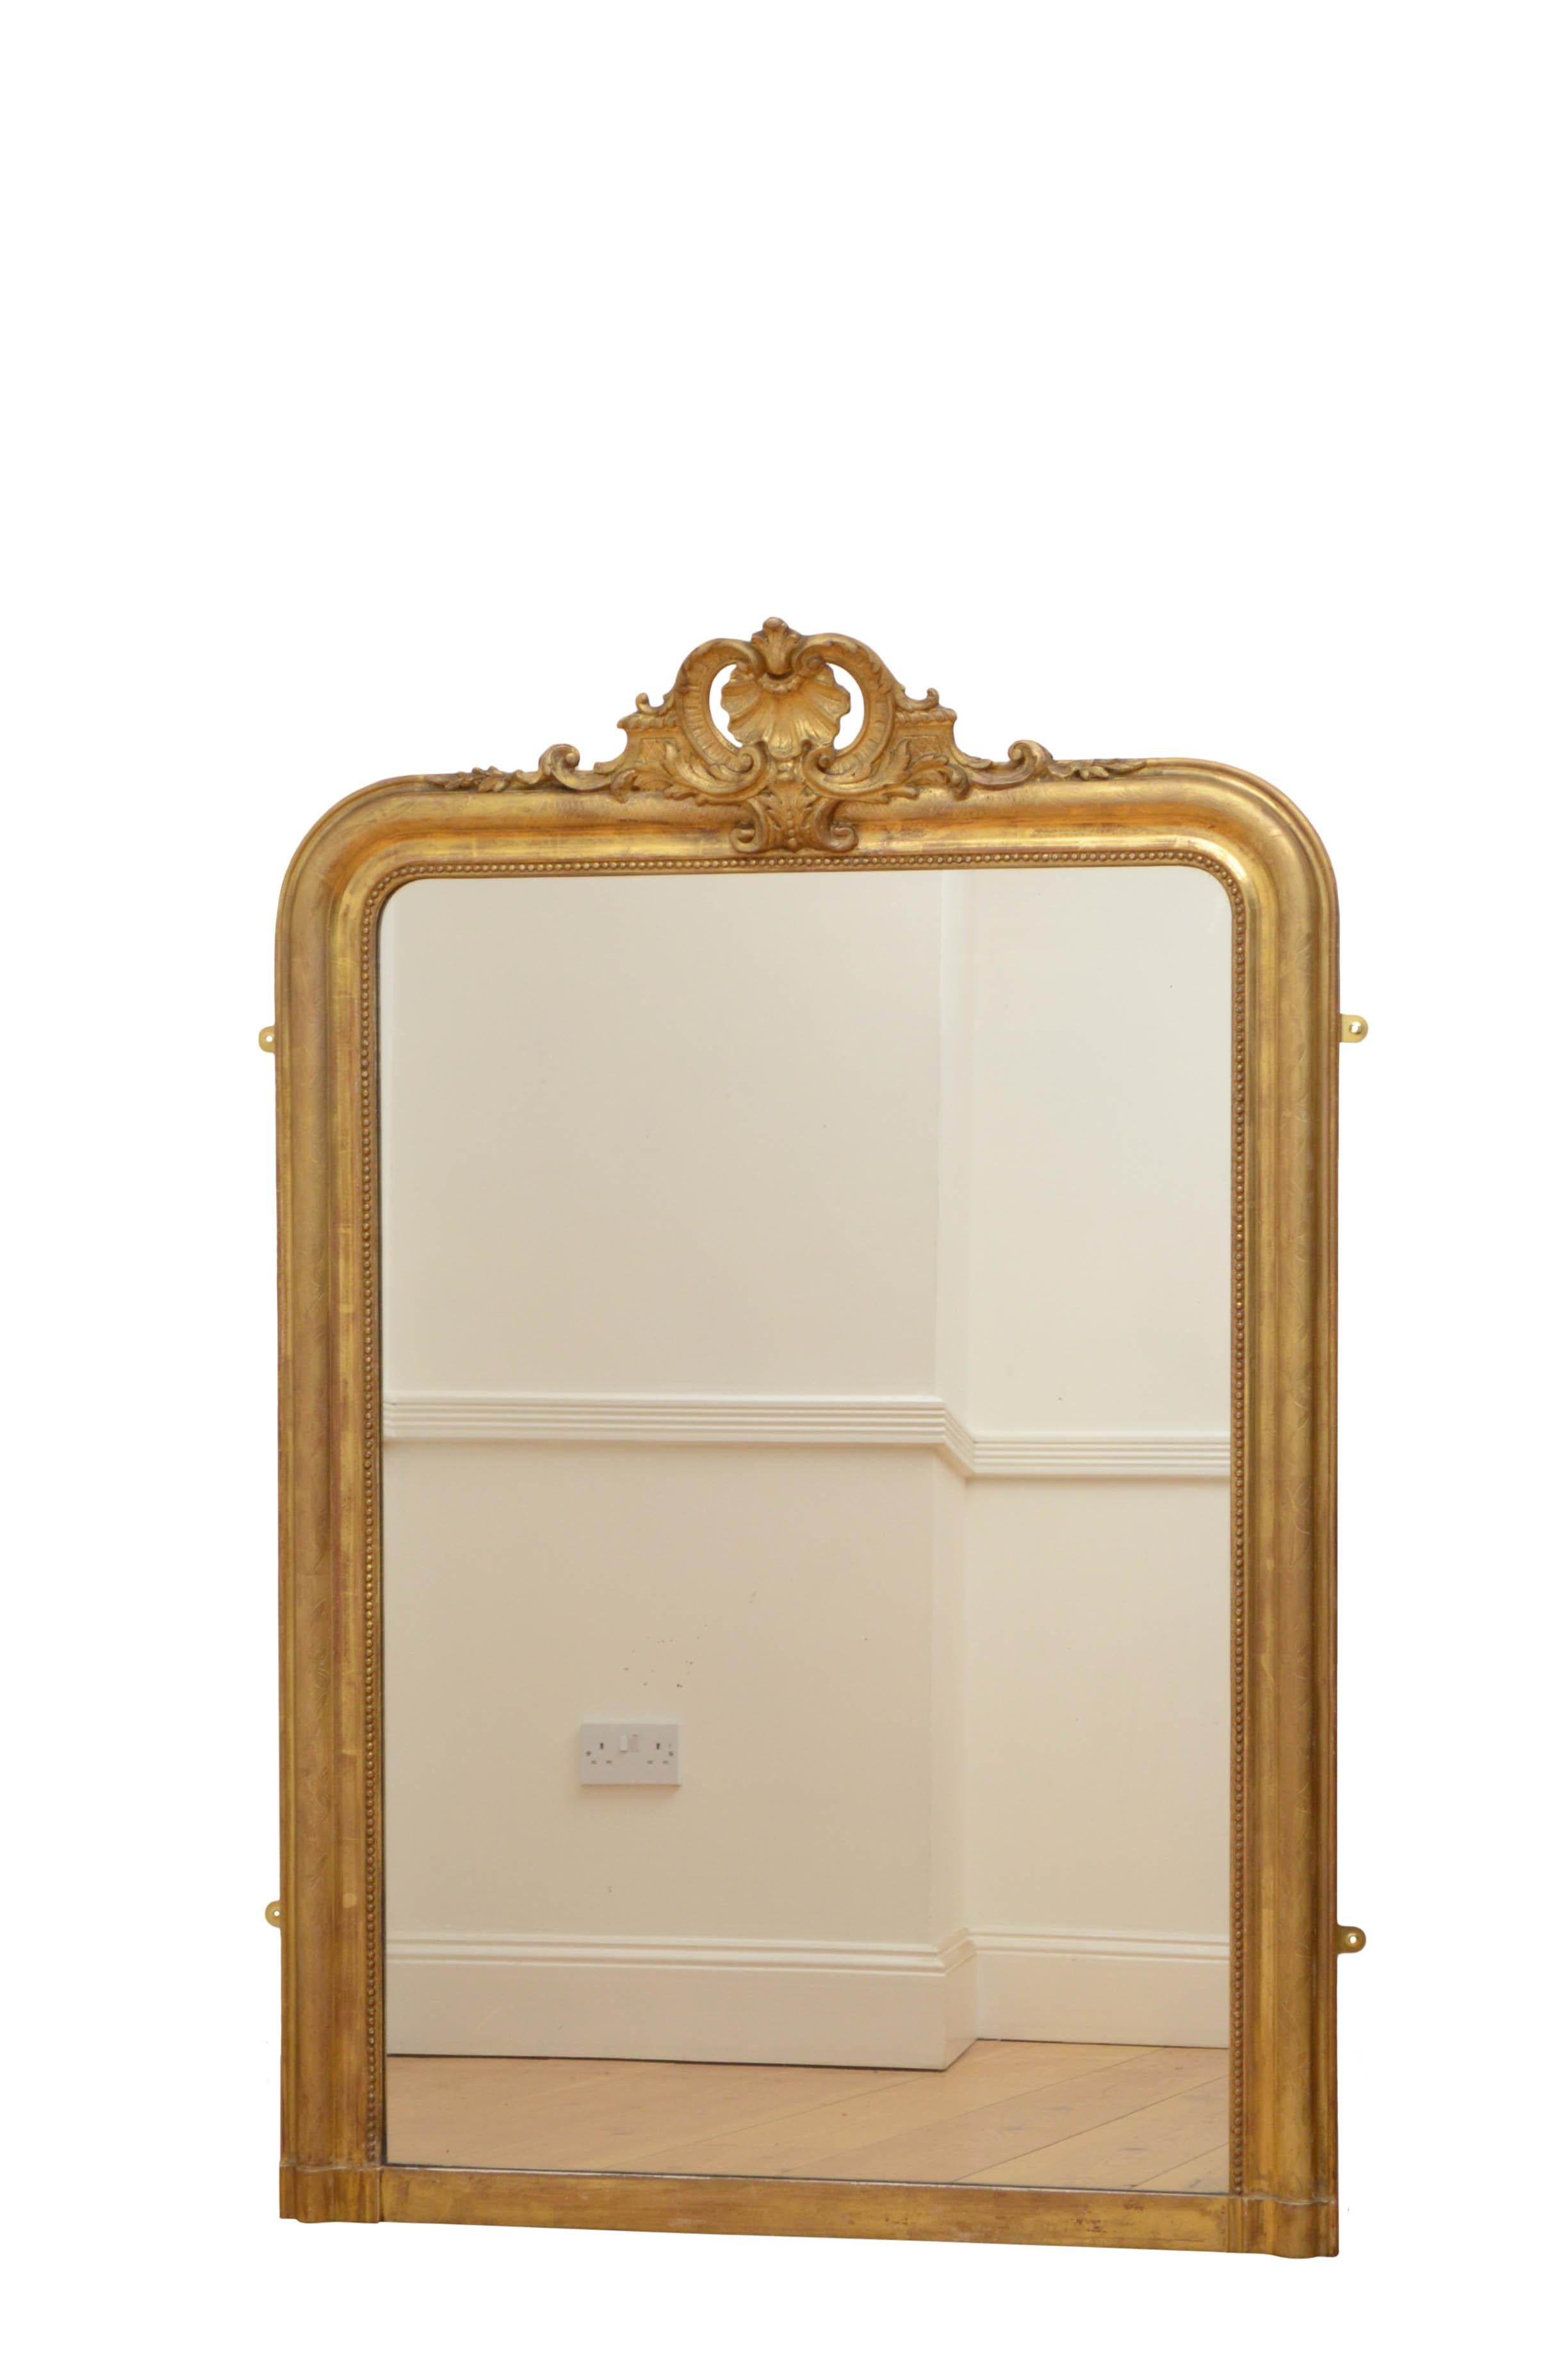 K0493 outstanding French overmantel mirror or wall mirror, having original glass with some foxing in beaded and moulded with floral etched decoration and shell crest to centre. This attractive wall mirror retains its original glass, gilt and